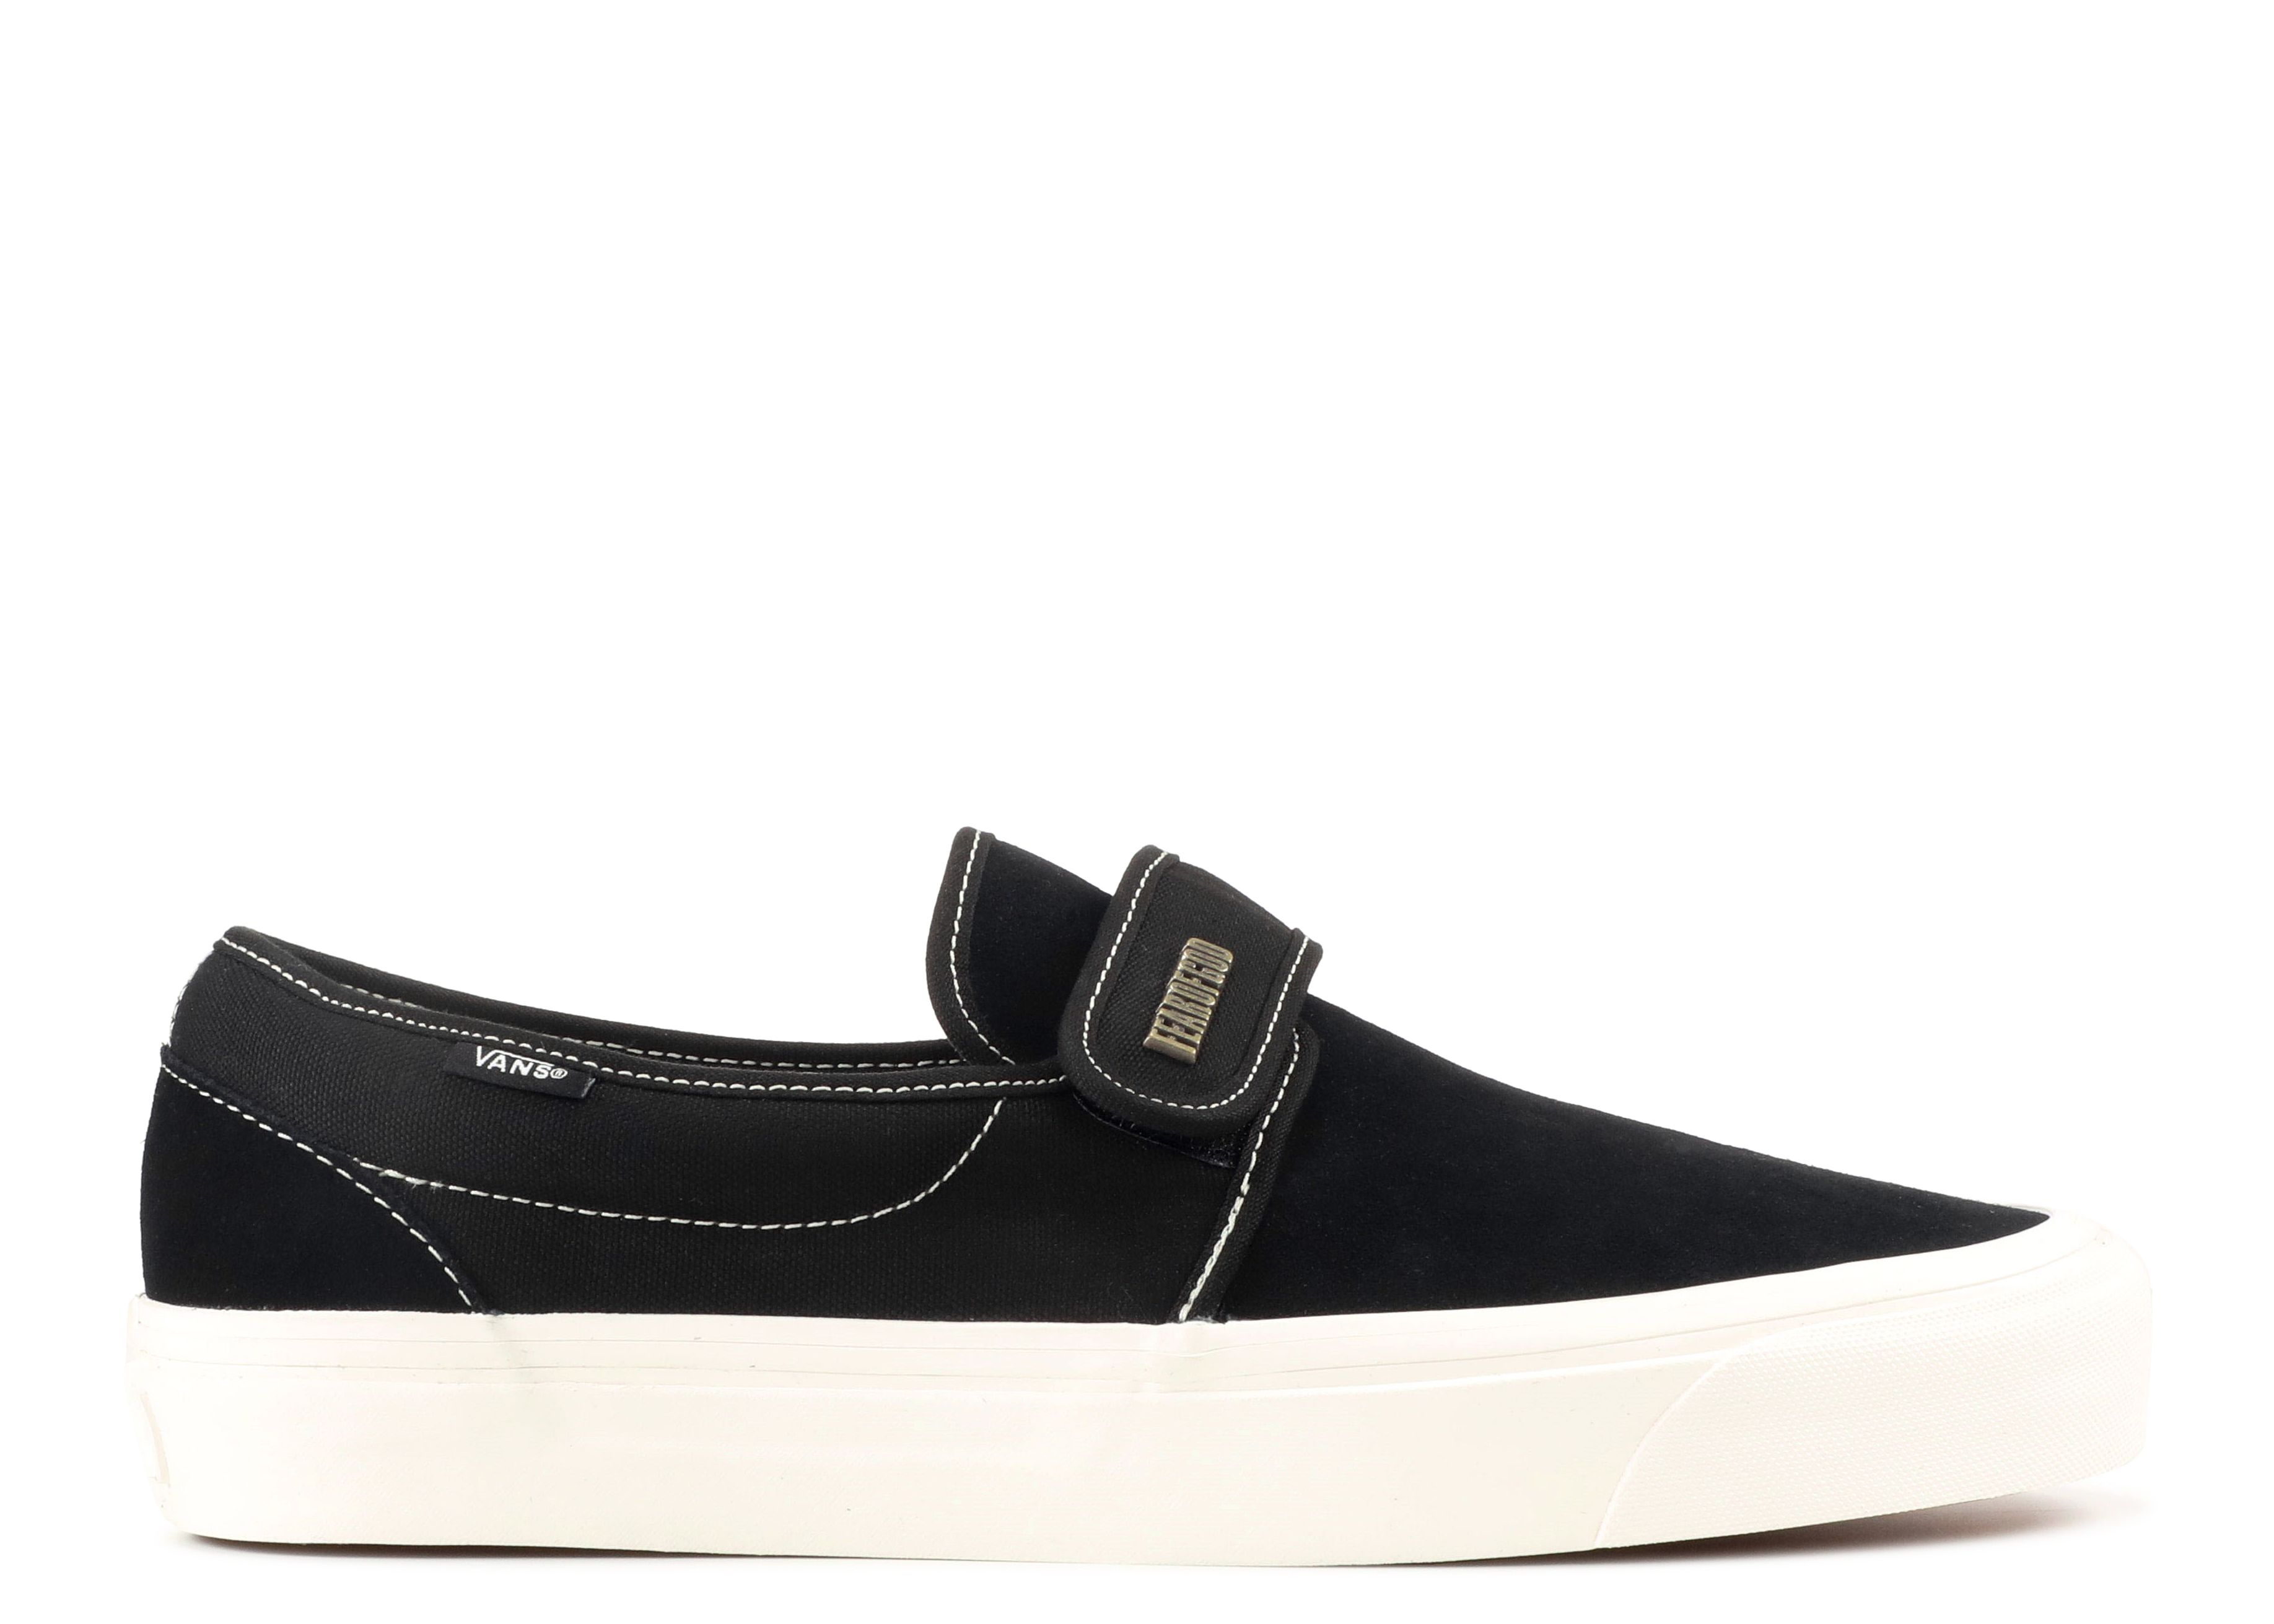 Fear Of God X On V DX 'Maxfield Exclusive' - Vans - VN0A3J9FPUF - black/suede Flight Club